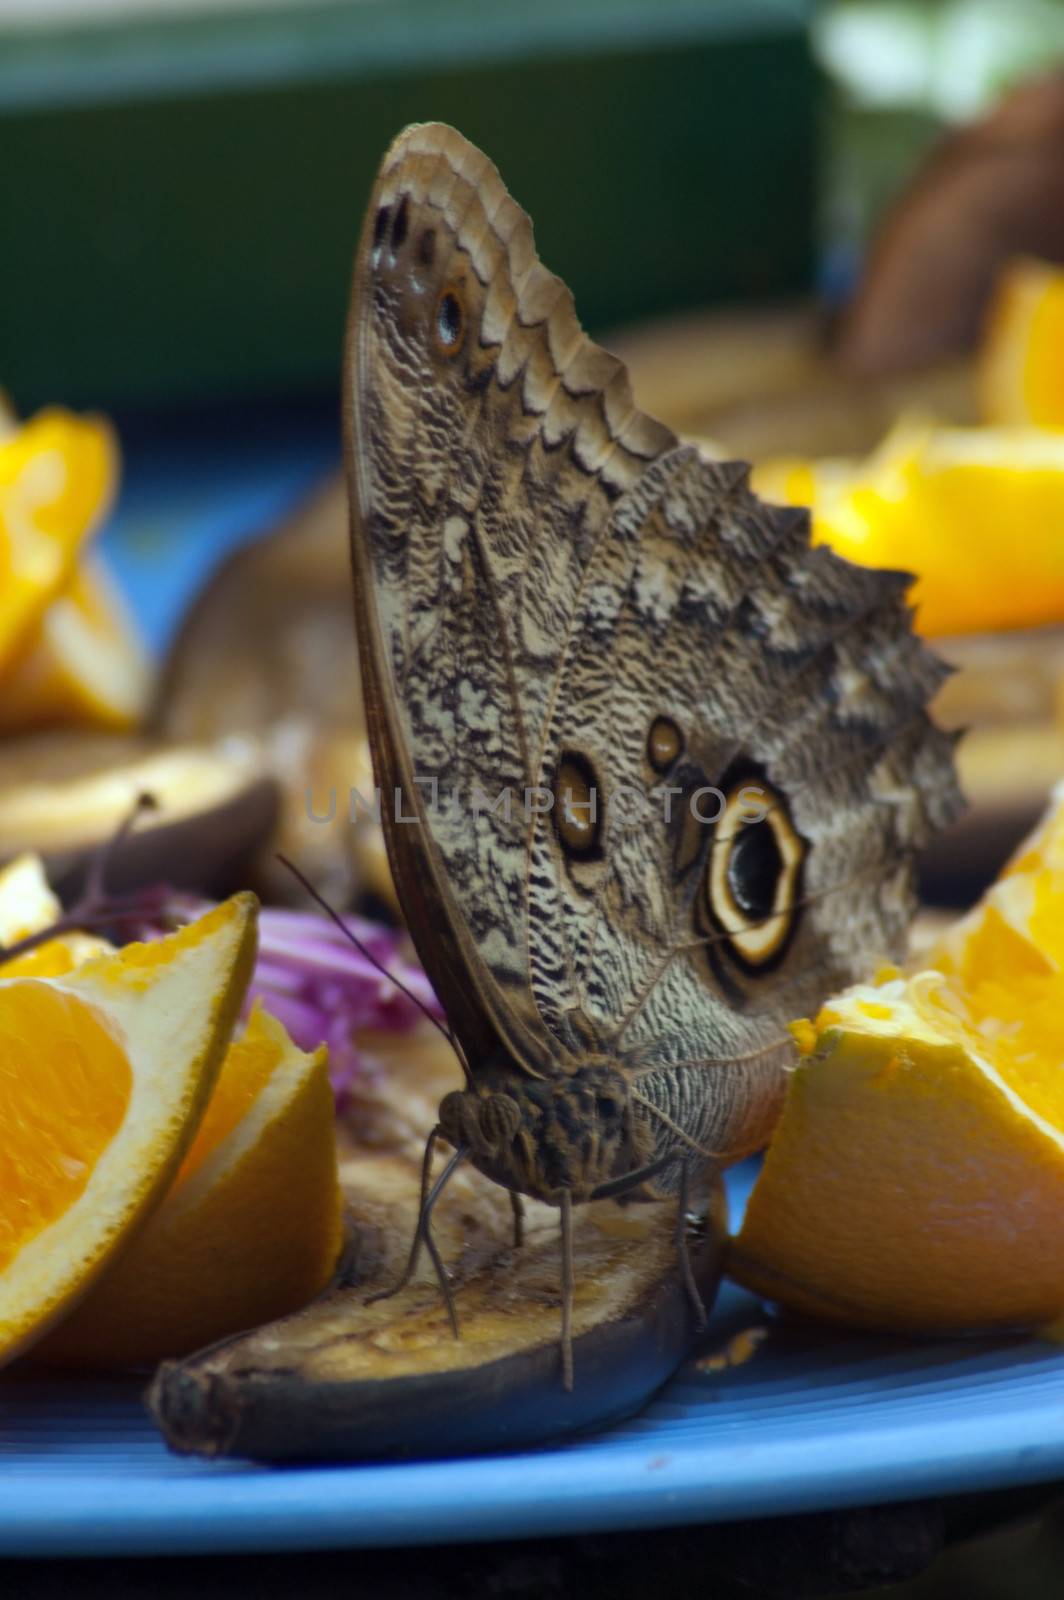 Eating butterfly on blur background